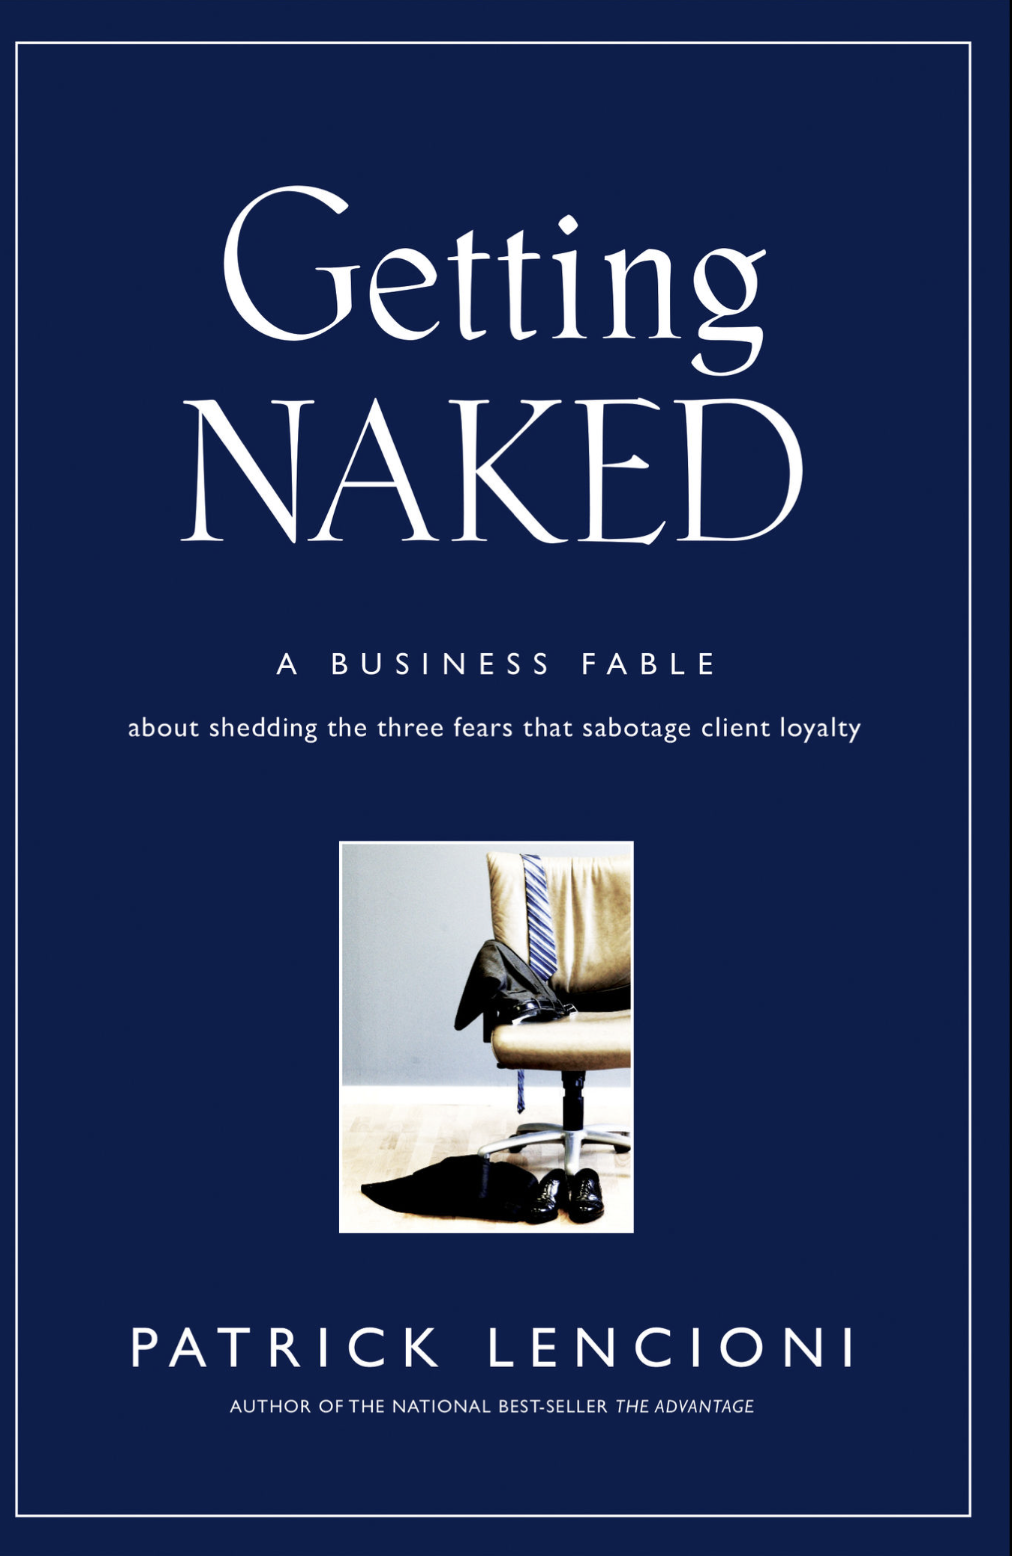 GettingNaked.png